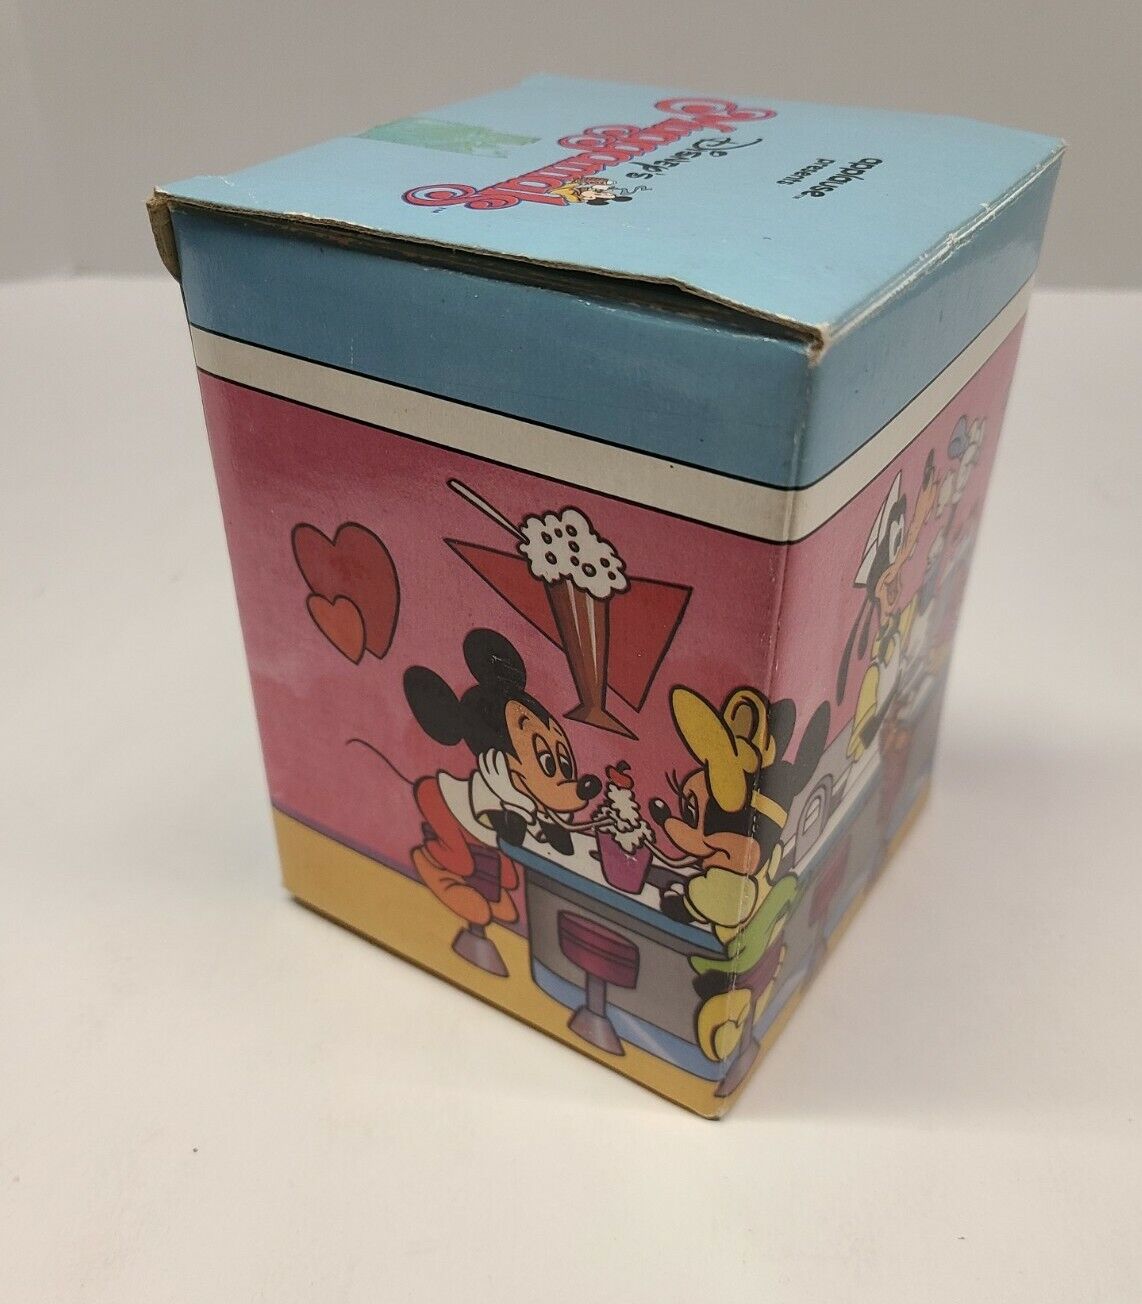 Rare Donald And Daisy And Friends Muggamals Walt Disney Mugs By Applause